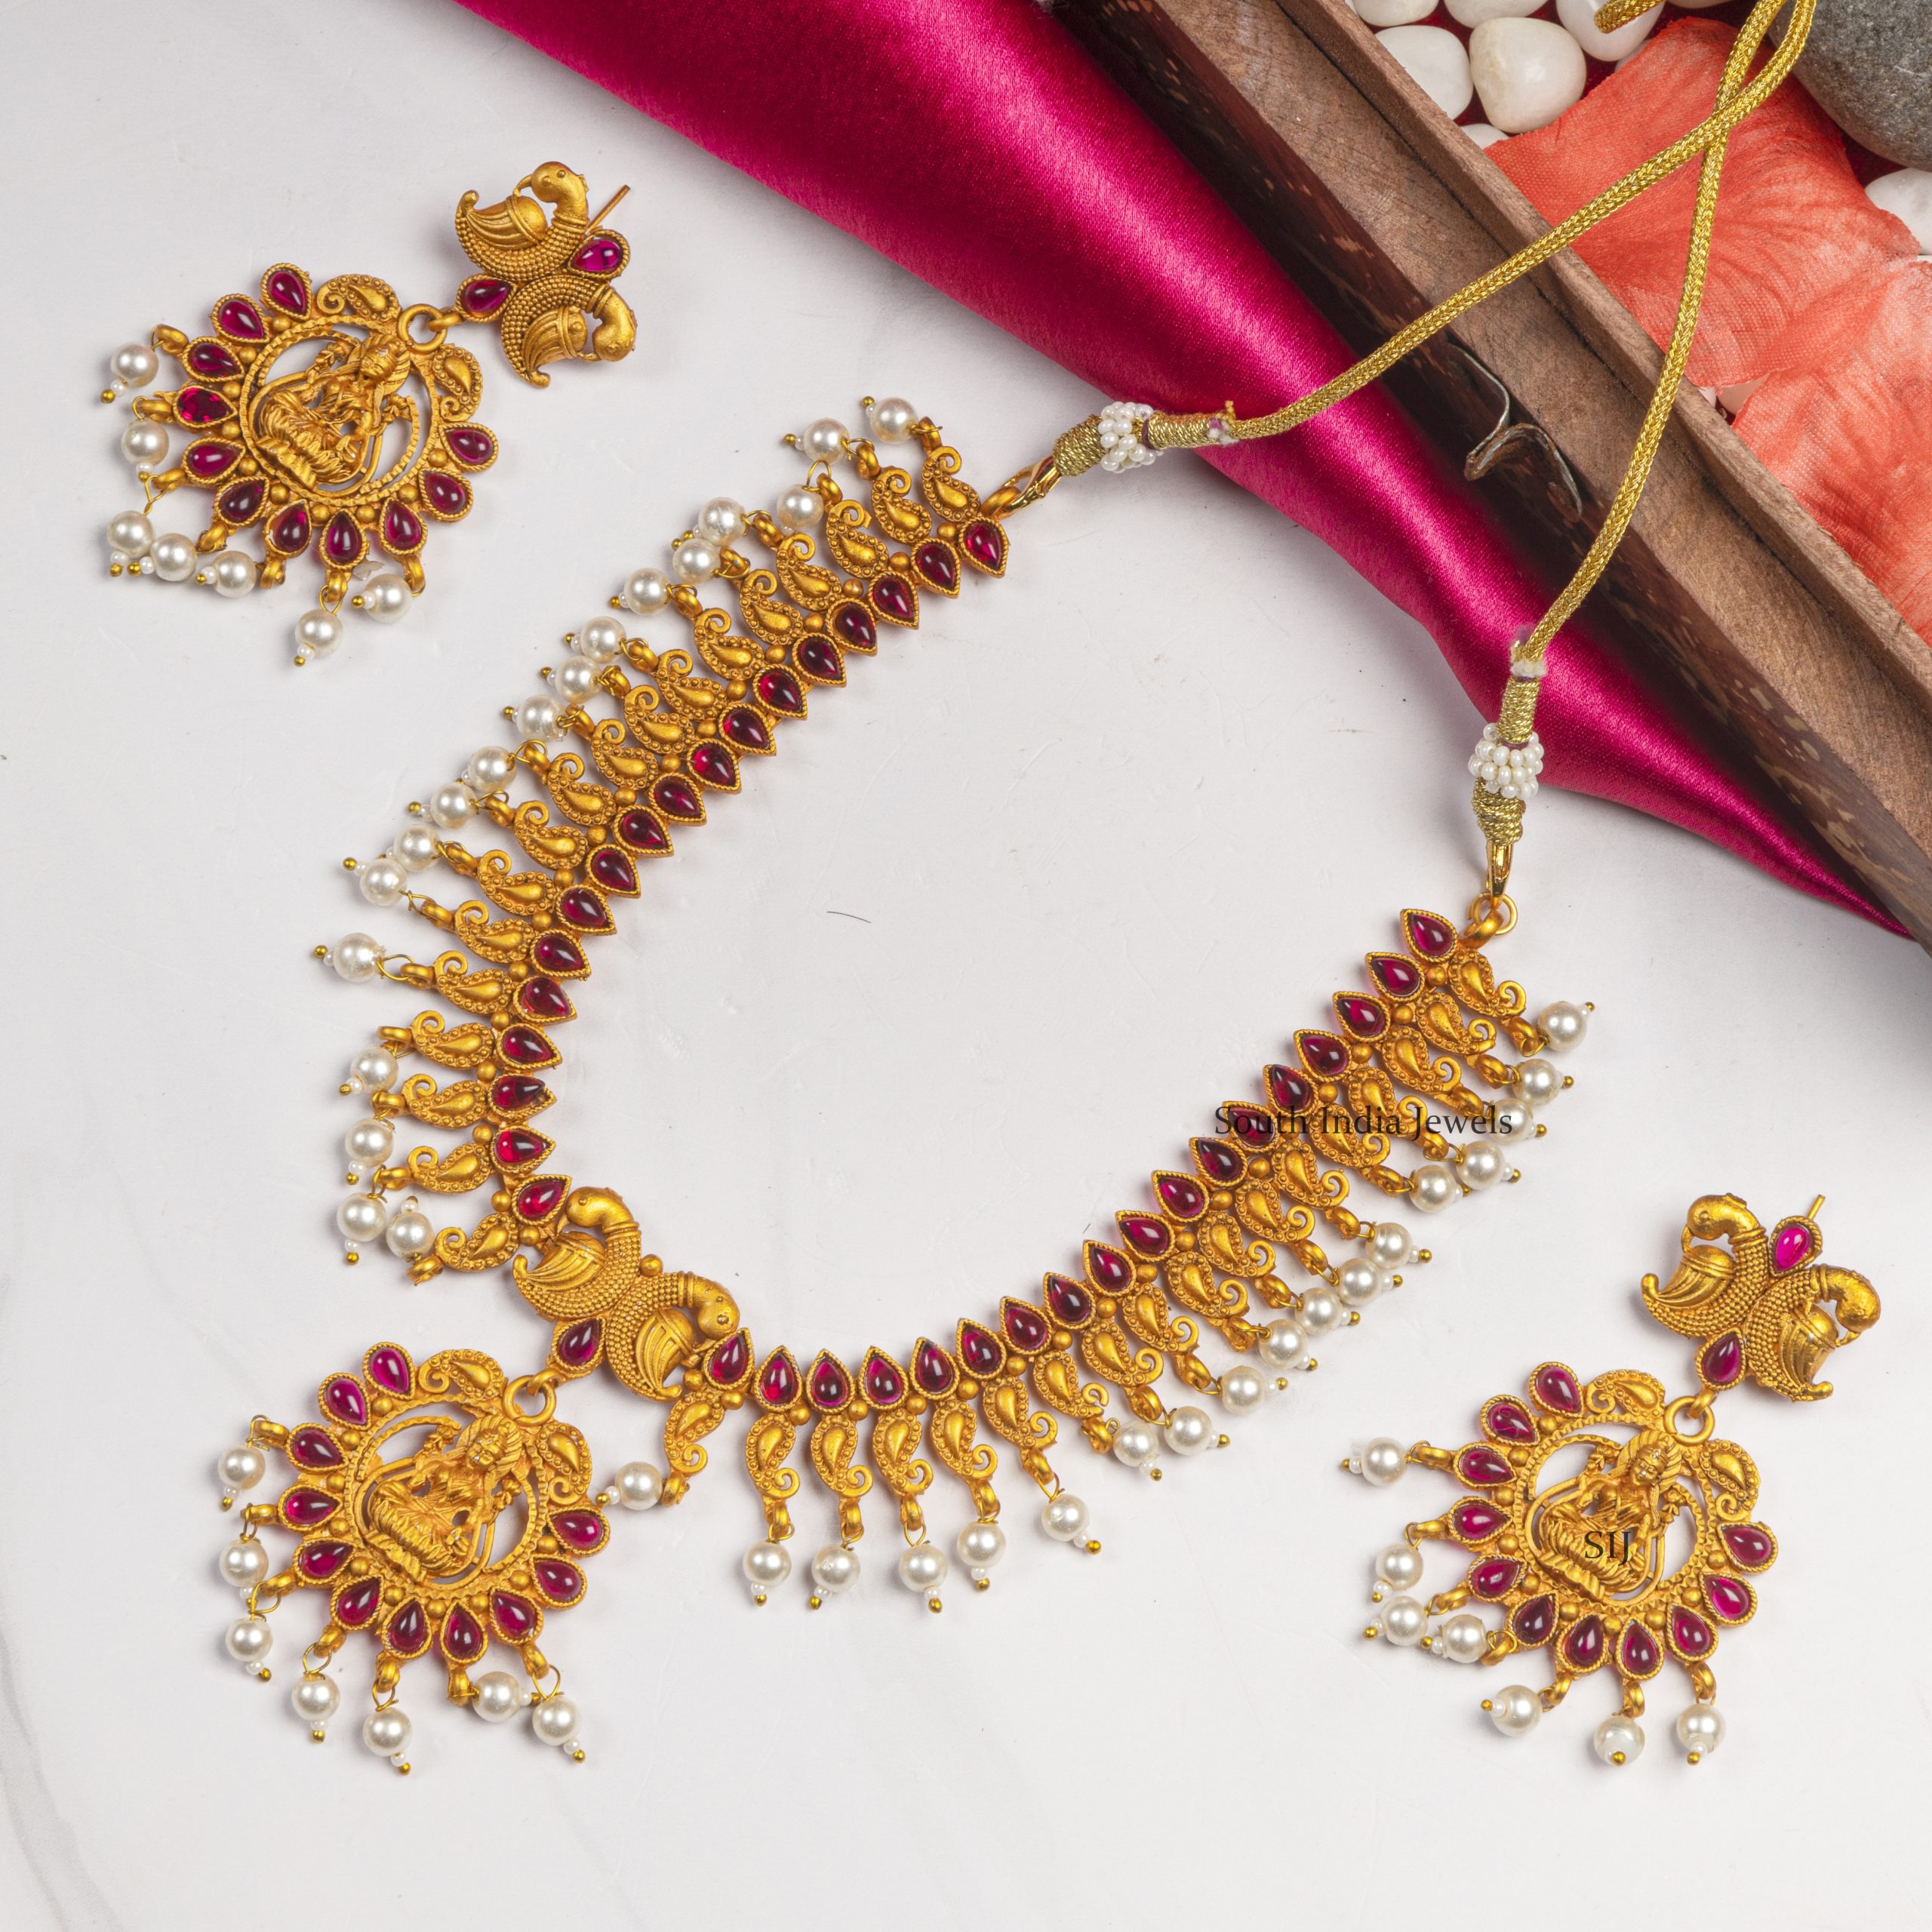 Temple Design Necklace Online-South India Jewels.